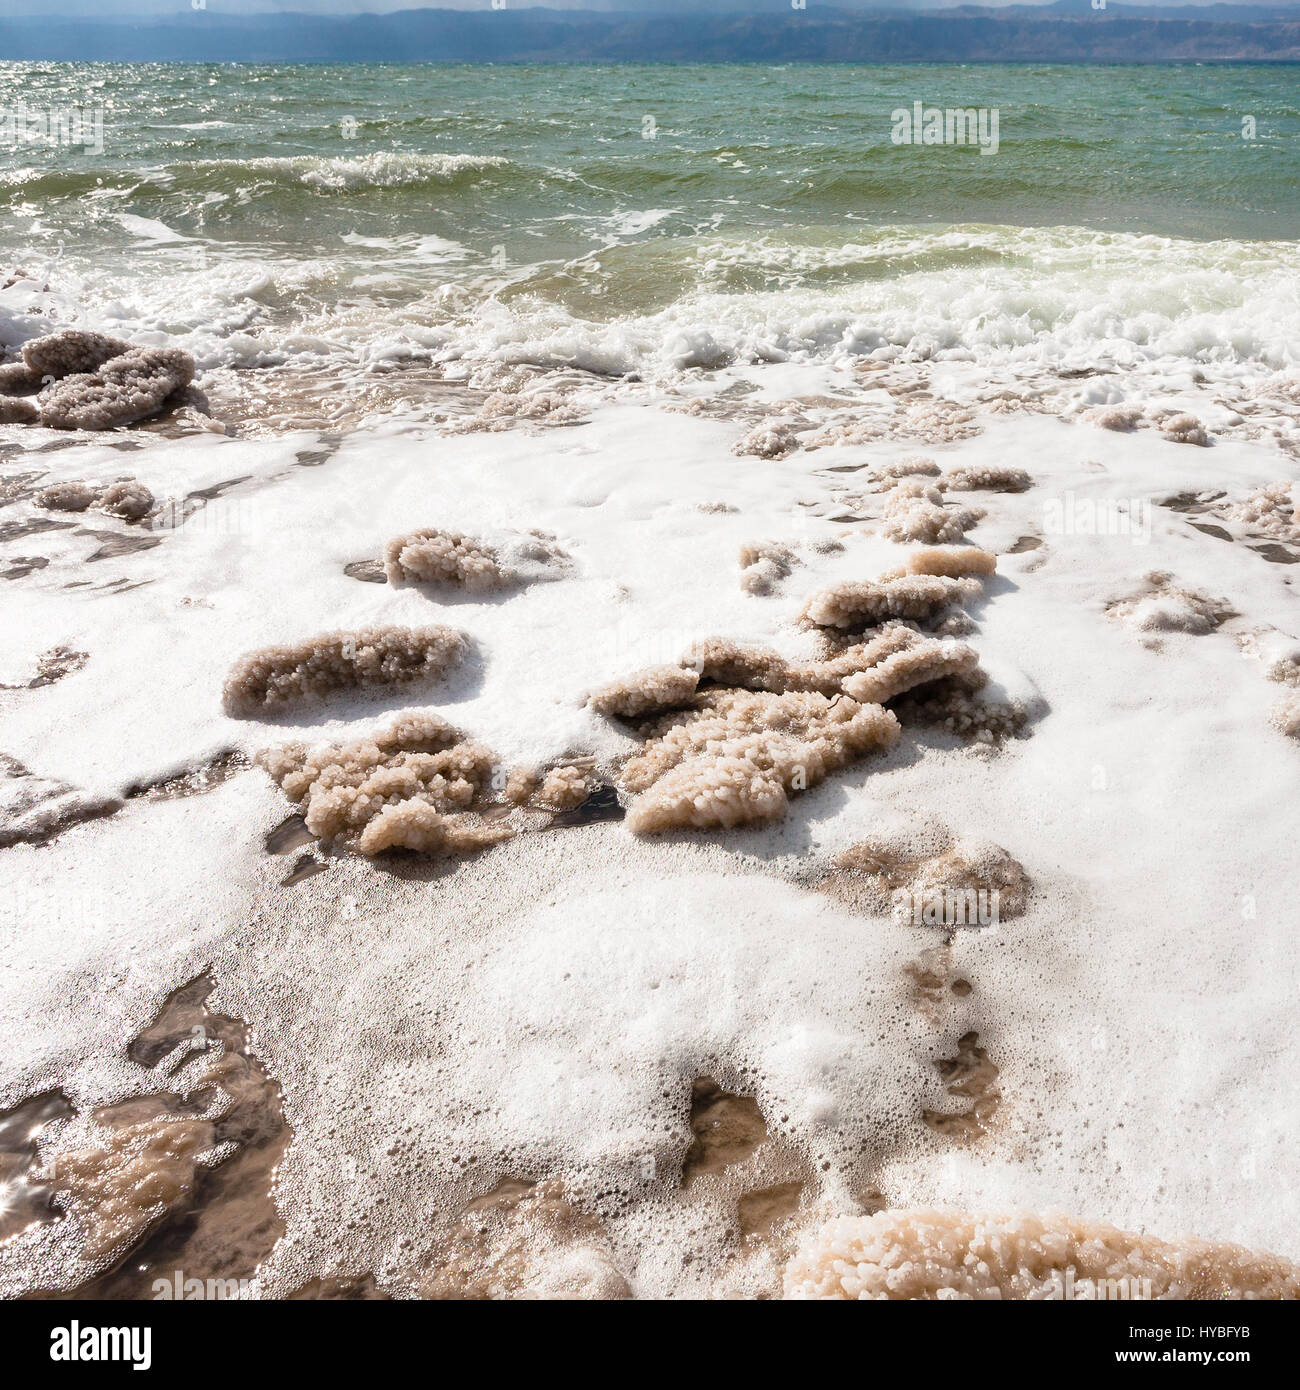 Travel to Middle East country Kingdom of Jordan - pieces of salt crystals on shore of Dead Sea in winter Stock Photo